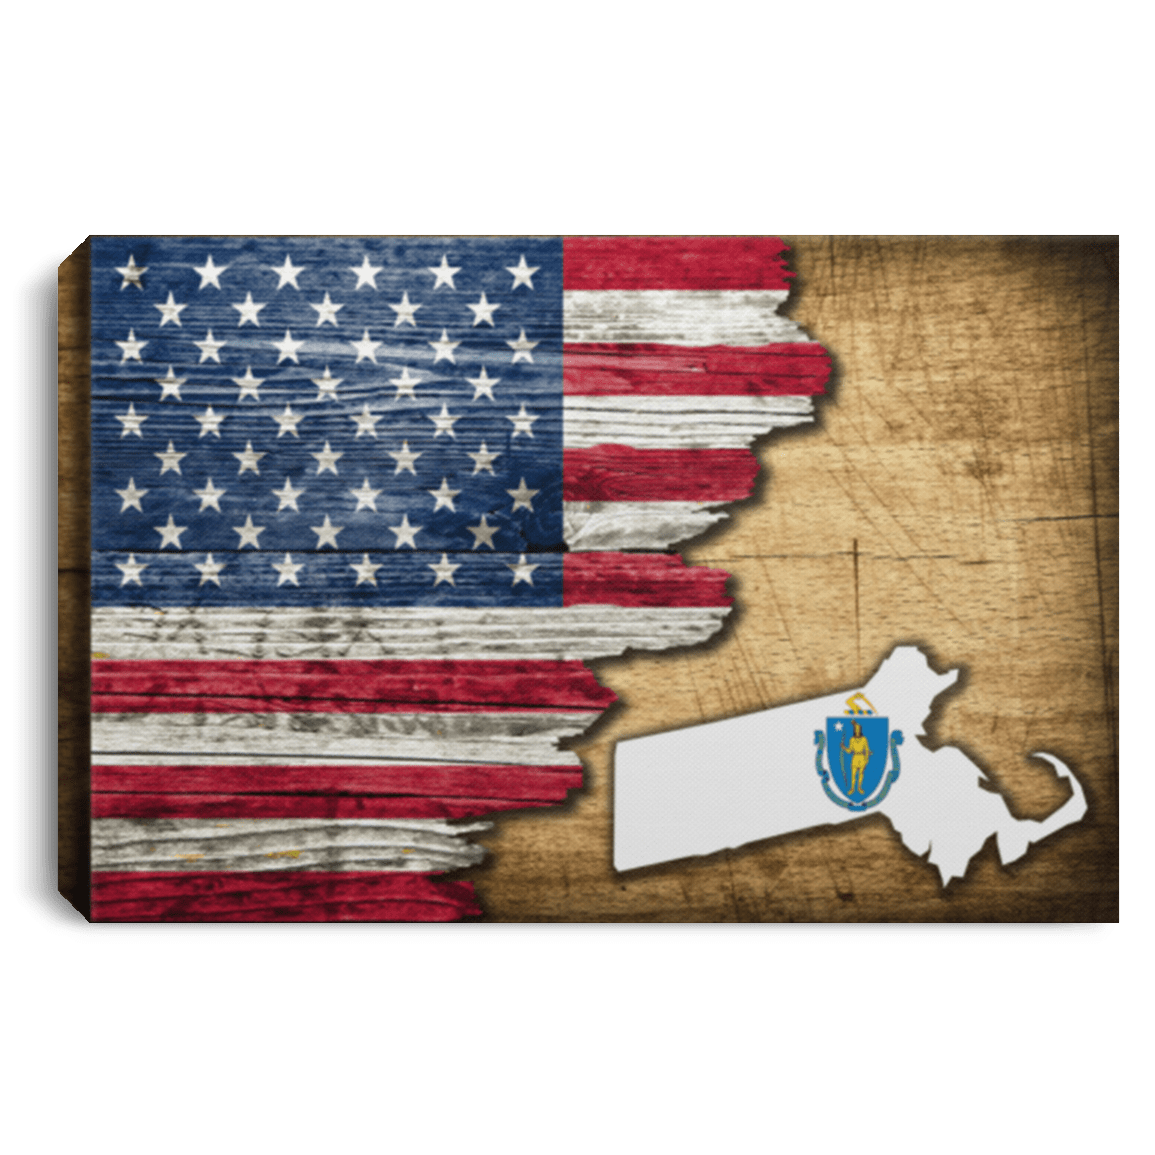 United States/Matssachusetts Flag Ripped Effect 12X8 Inches Landscape Canvas .75In Frame